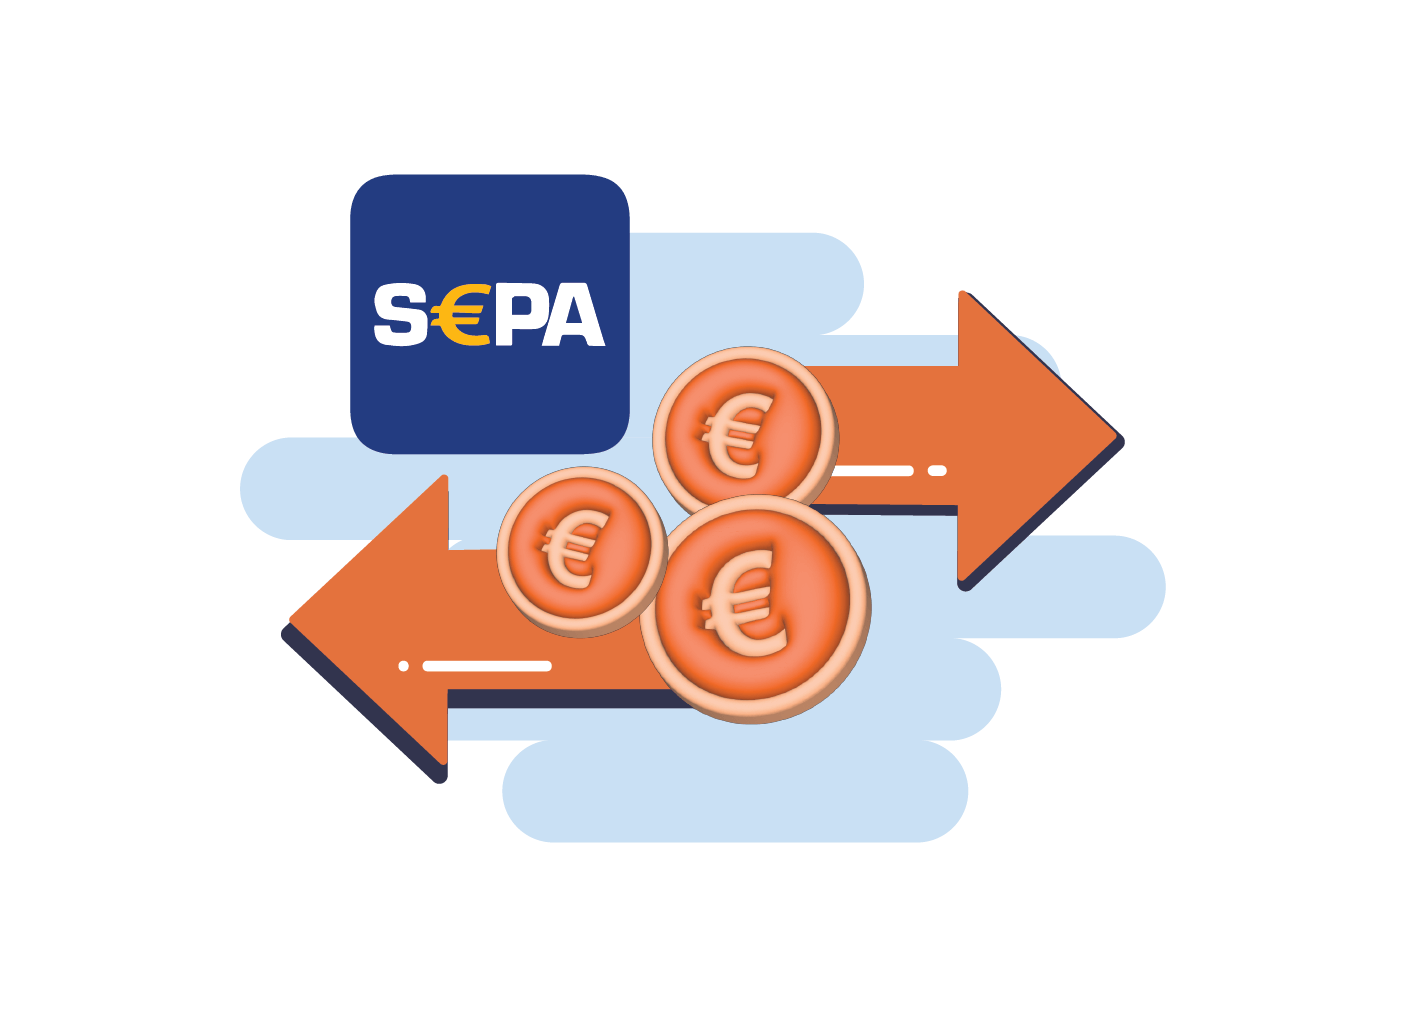 SEPA Payments